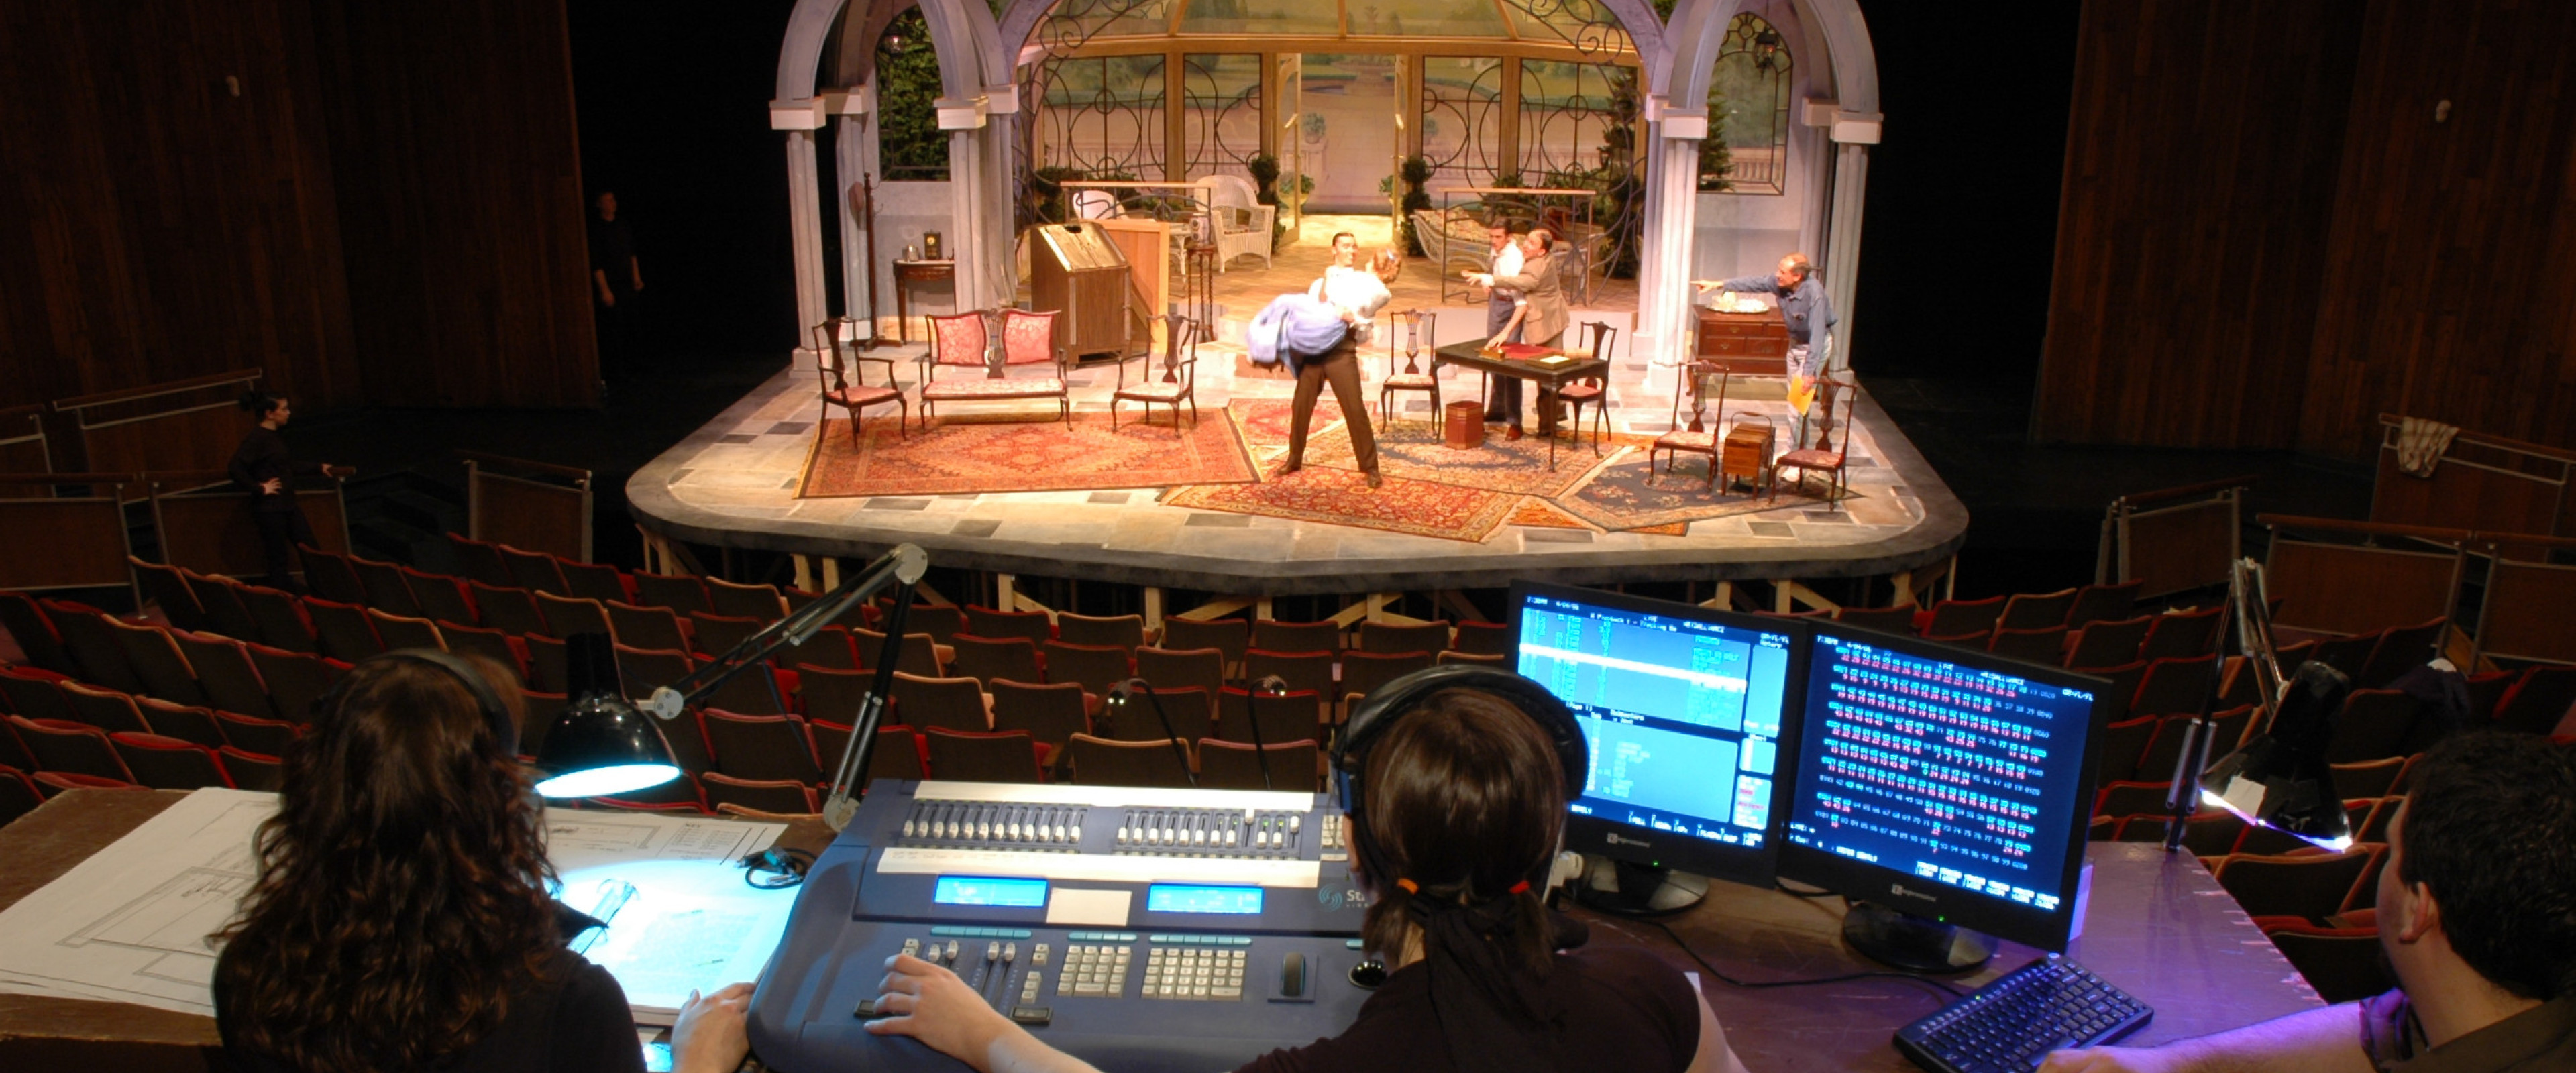 Theatre seen from behind work table with performance on stage.